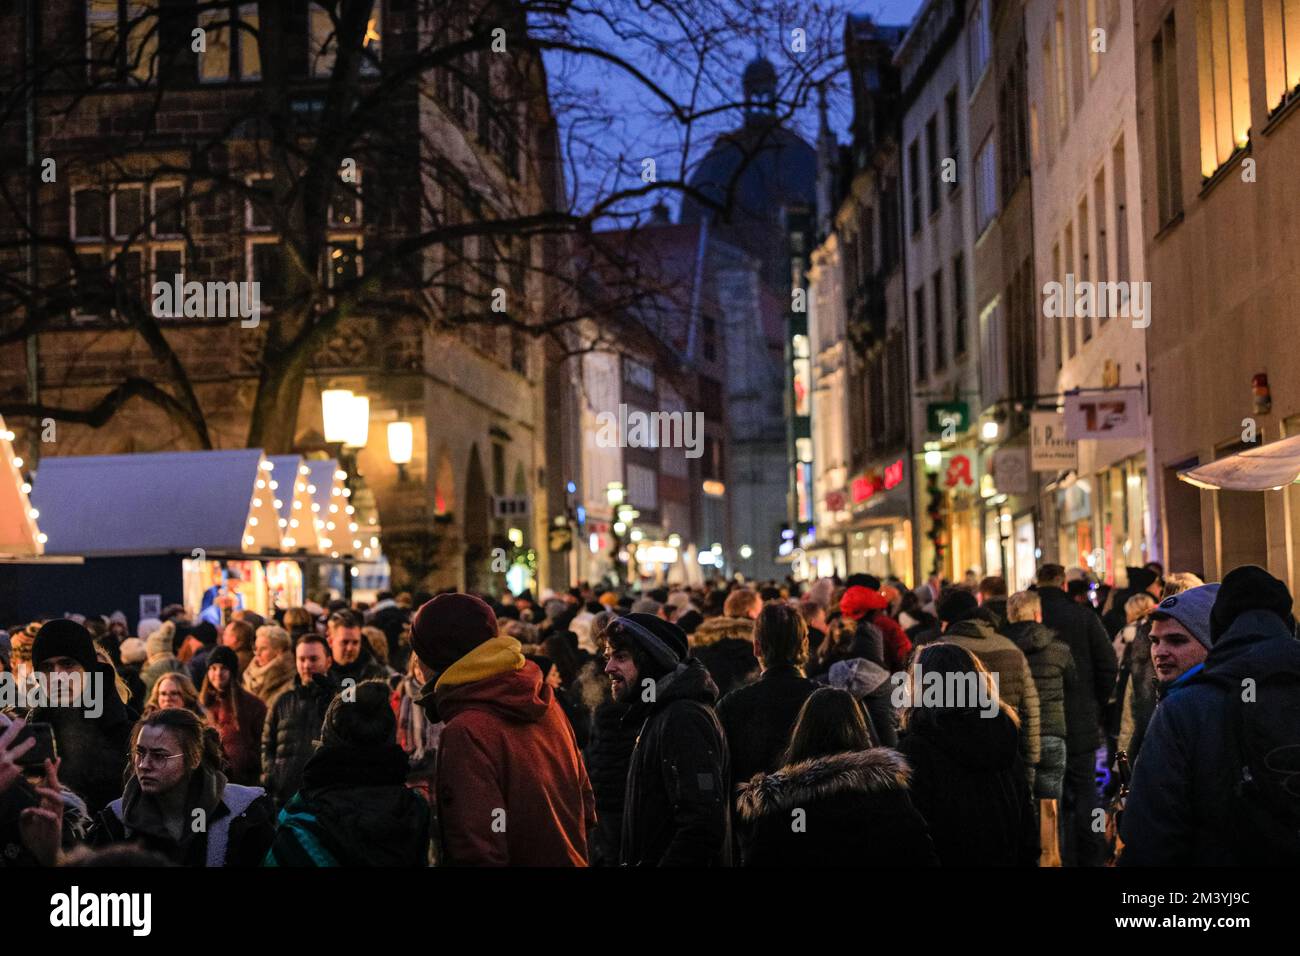 Münster, Germany. 17th Dec, 2022. The historic city centre of Münster in Westfalia becomes quite crowded with festive shoppers and visitors to the town's 5 inter-connected Christmas Markets, drawing in visitors from nearby cities, coach tours, as well as many Dutch and other day trippers. Credit: Imageplotter/Alamy Live News Stock Photo